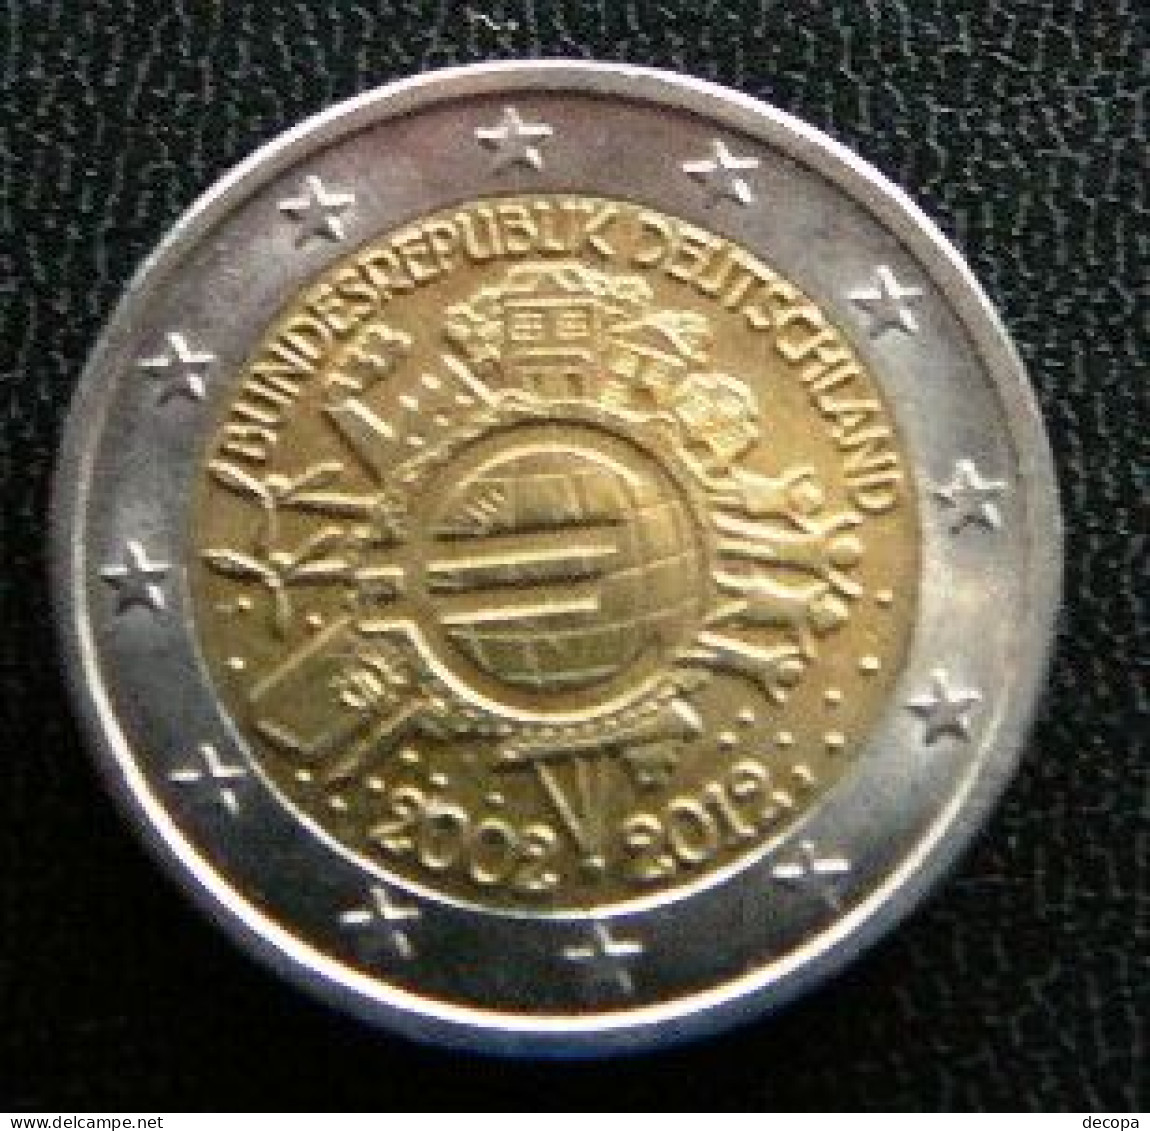 Germany - Allemagne - Duitsland   2 EURO 2012 J   10 Years Euro      Speciale Uitgave - Commemorative - Allemagne